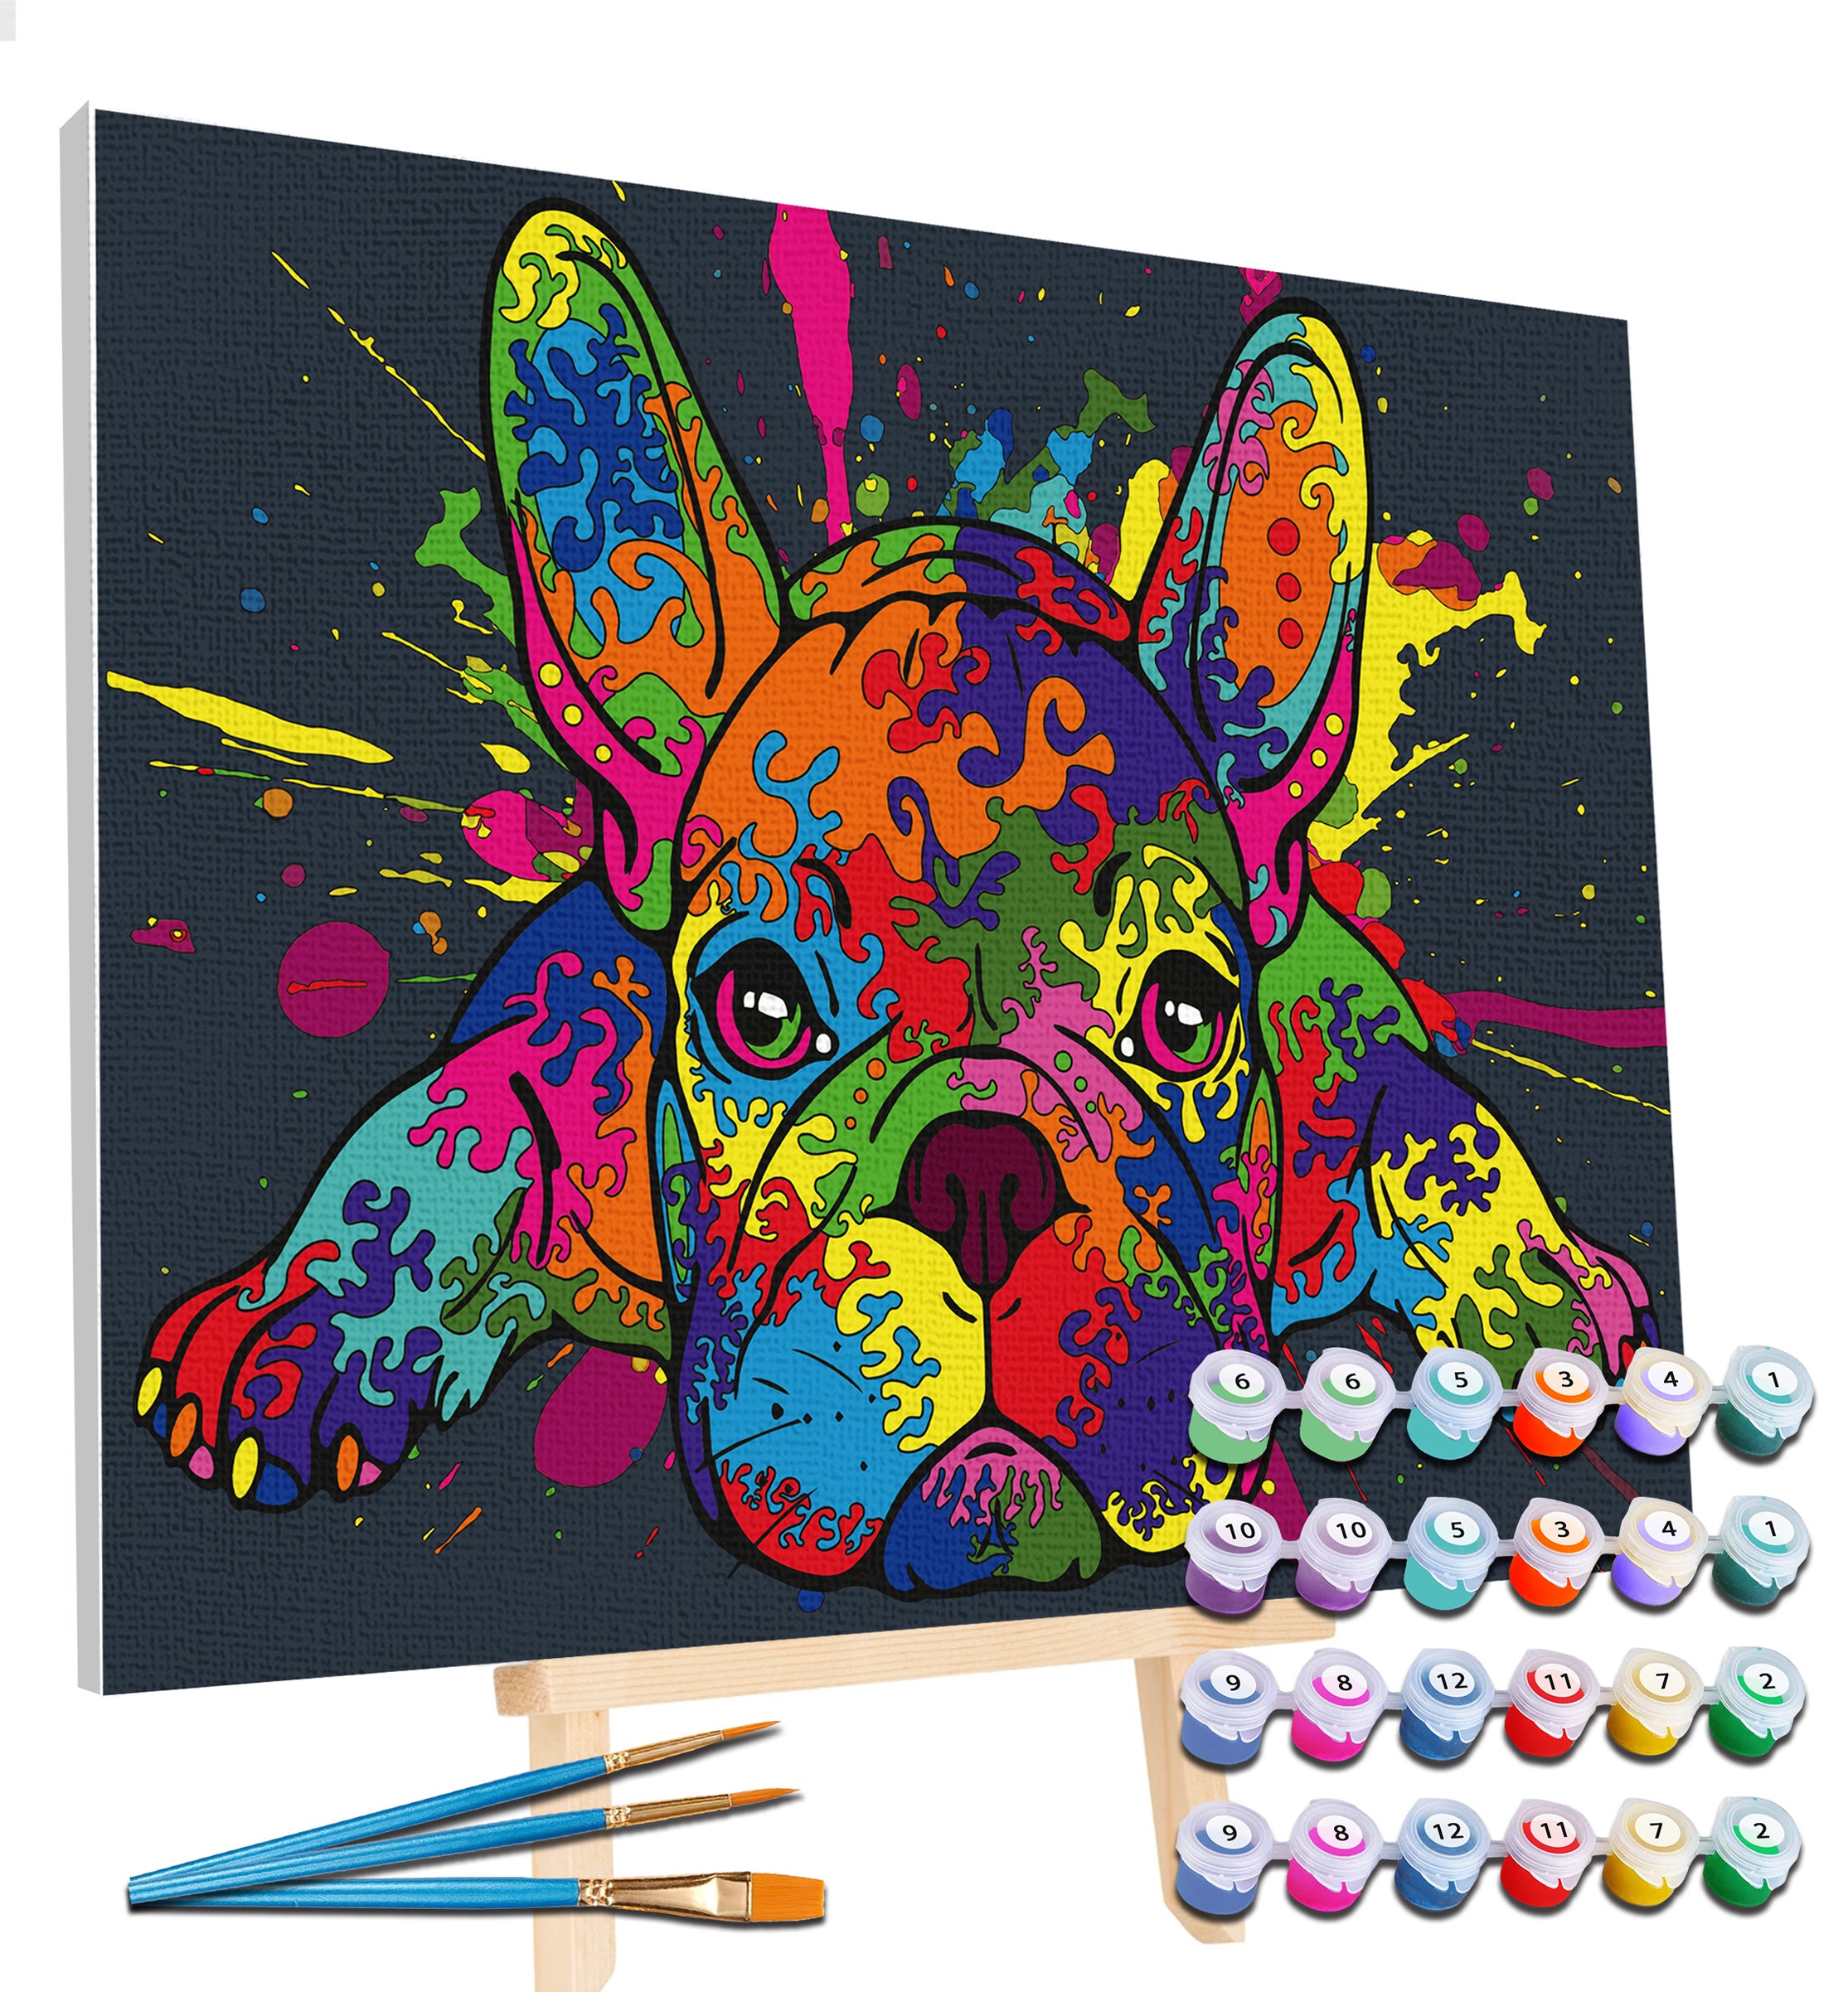 French Bulldog paint by number, French Bulldog painting, Dog painting for kids, Dog painting easy, French Bulldog painting set, washable acrylic paints,  gifts for girls, paint by number on canvas, paint by numbers ready for wall mounting, paint by numbers for kids, paint by numbers for beginners, paint by numbers for children, paint by numbers with frame, framed paint by numbers, French bulldog gifts,  French bulldog toys, French Bulldog Art, arts and crafts for adults, fluorescent paints, UV Neon Paints